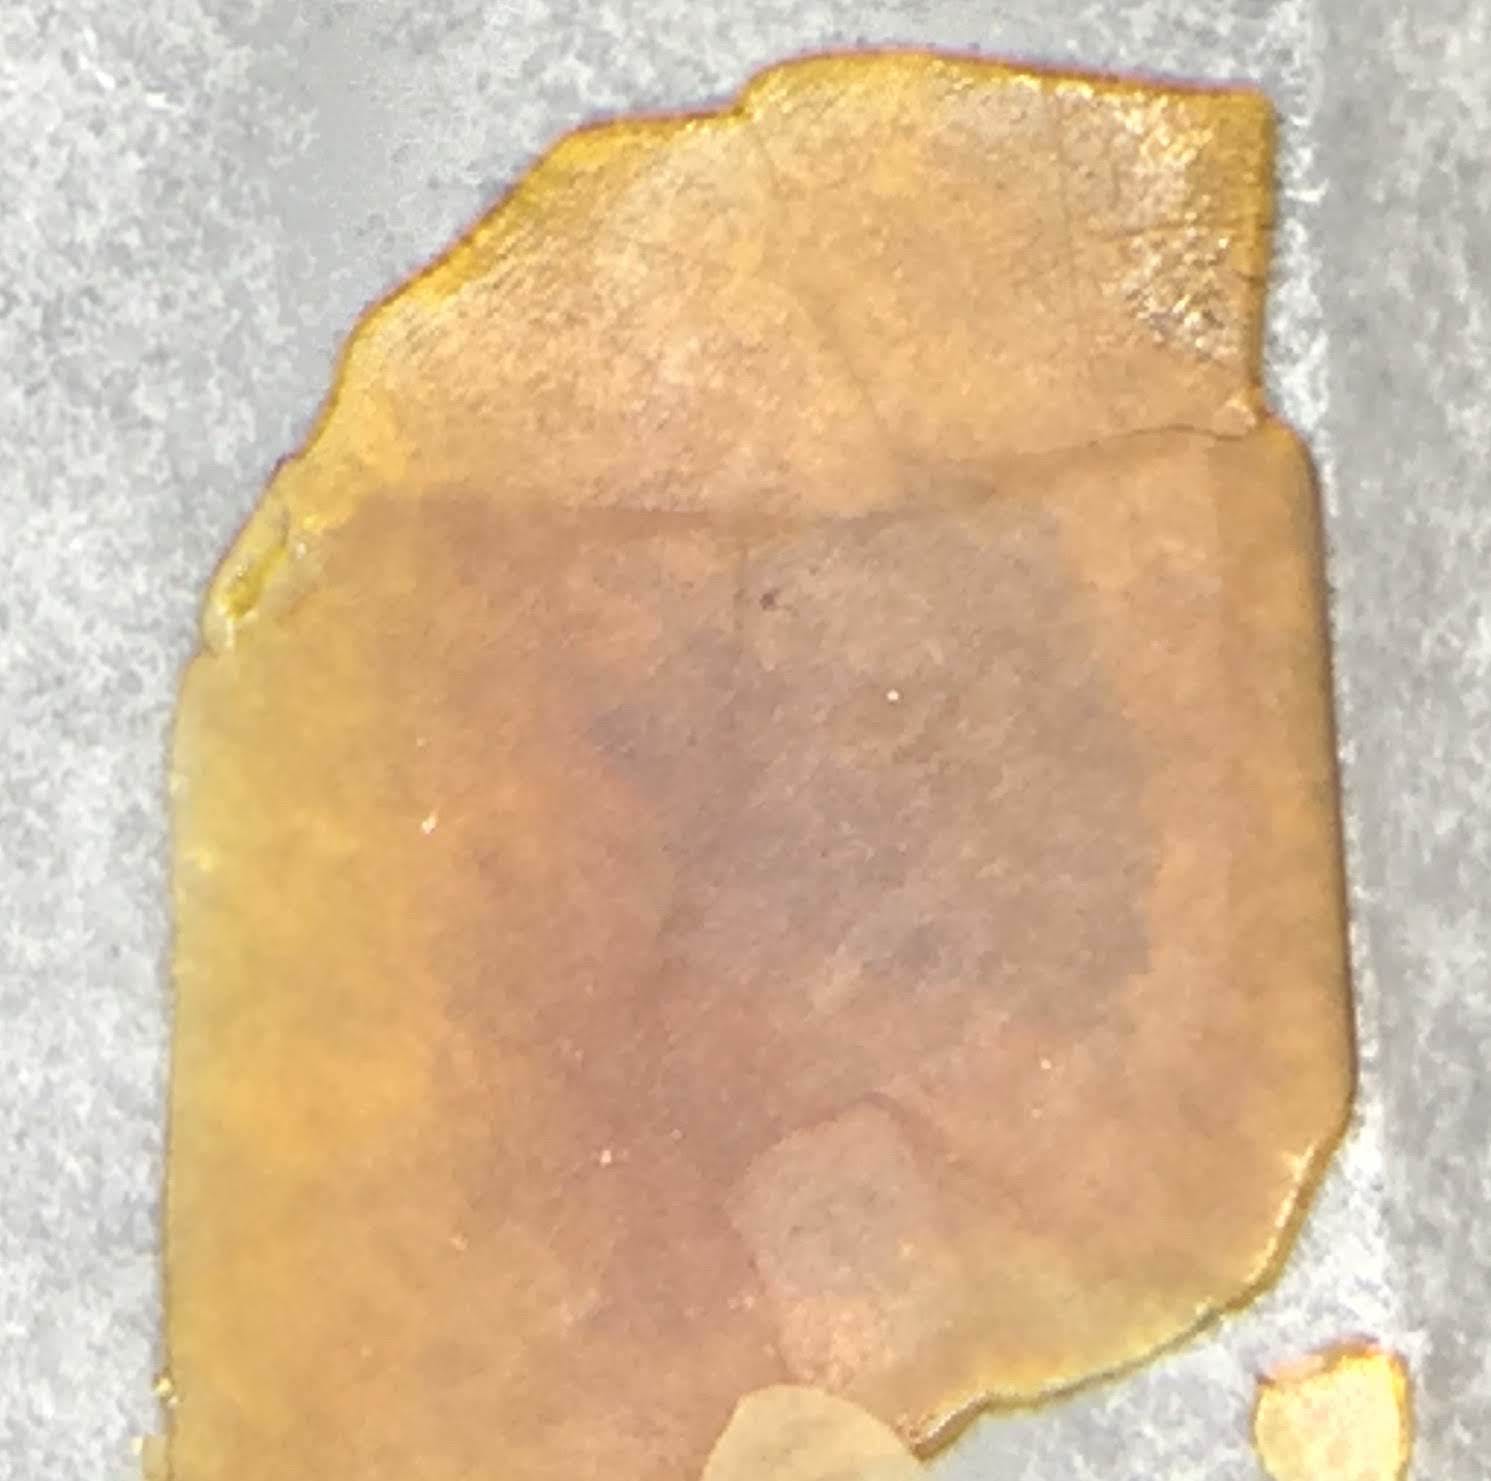 concentrate-cherry-bomb-shatter-crxlocal-product-colab